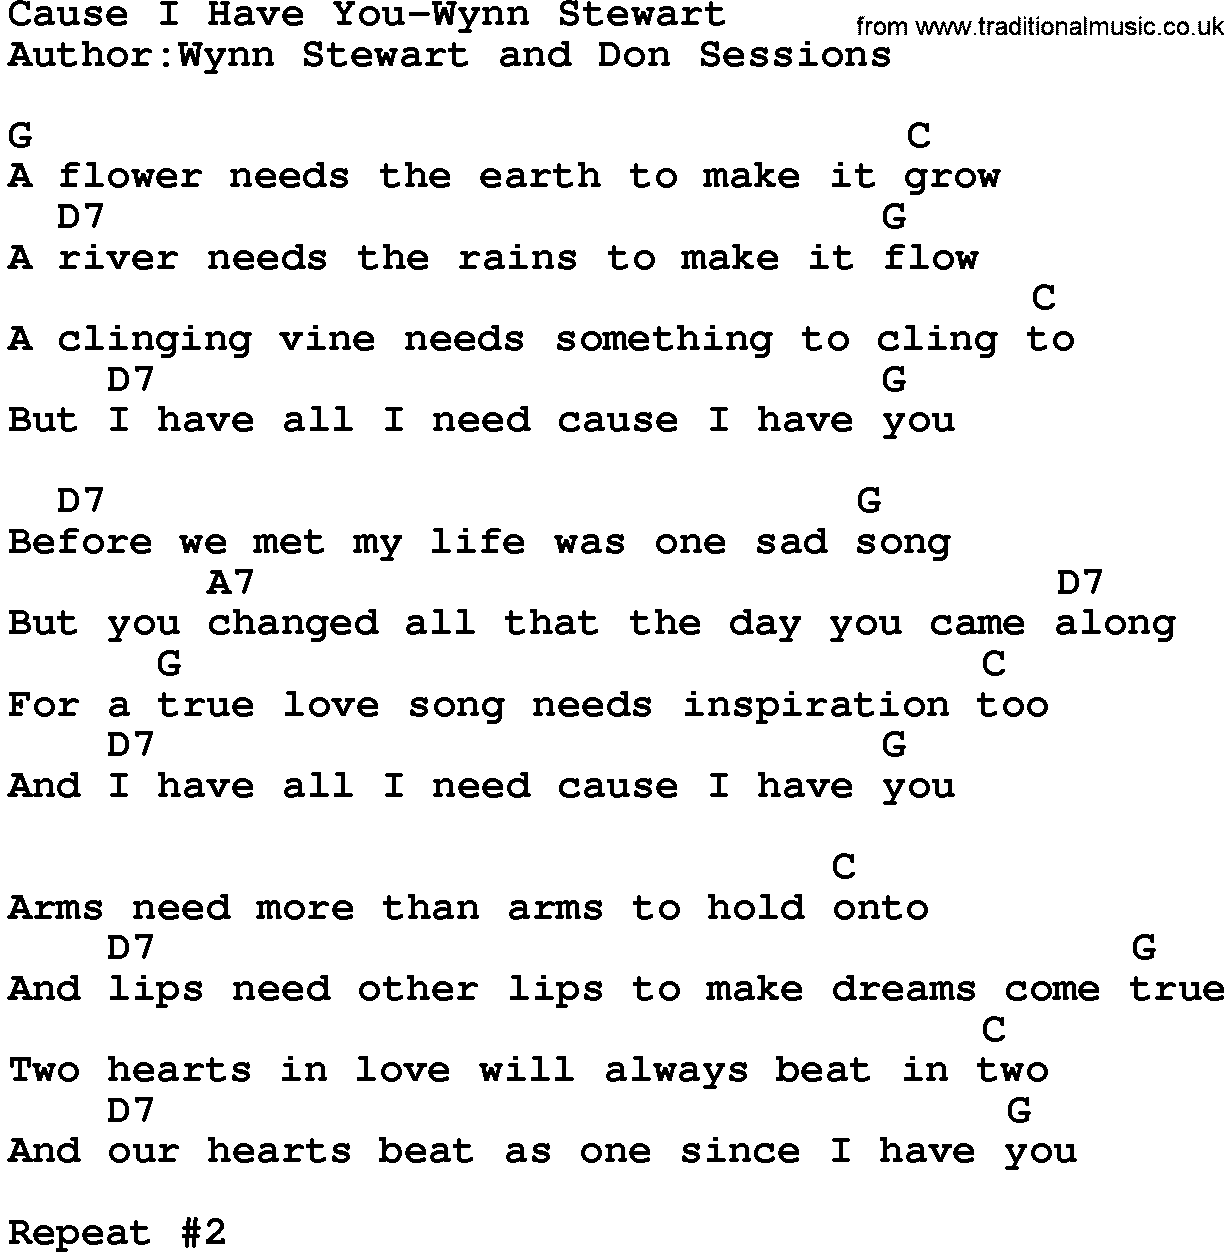 Country music song: Cause I Have You-Wynn Stewart lyrics and chords